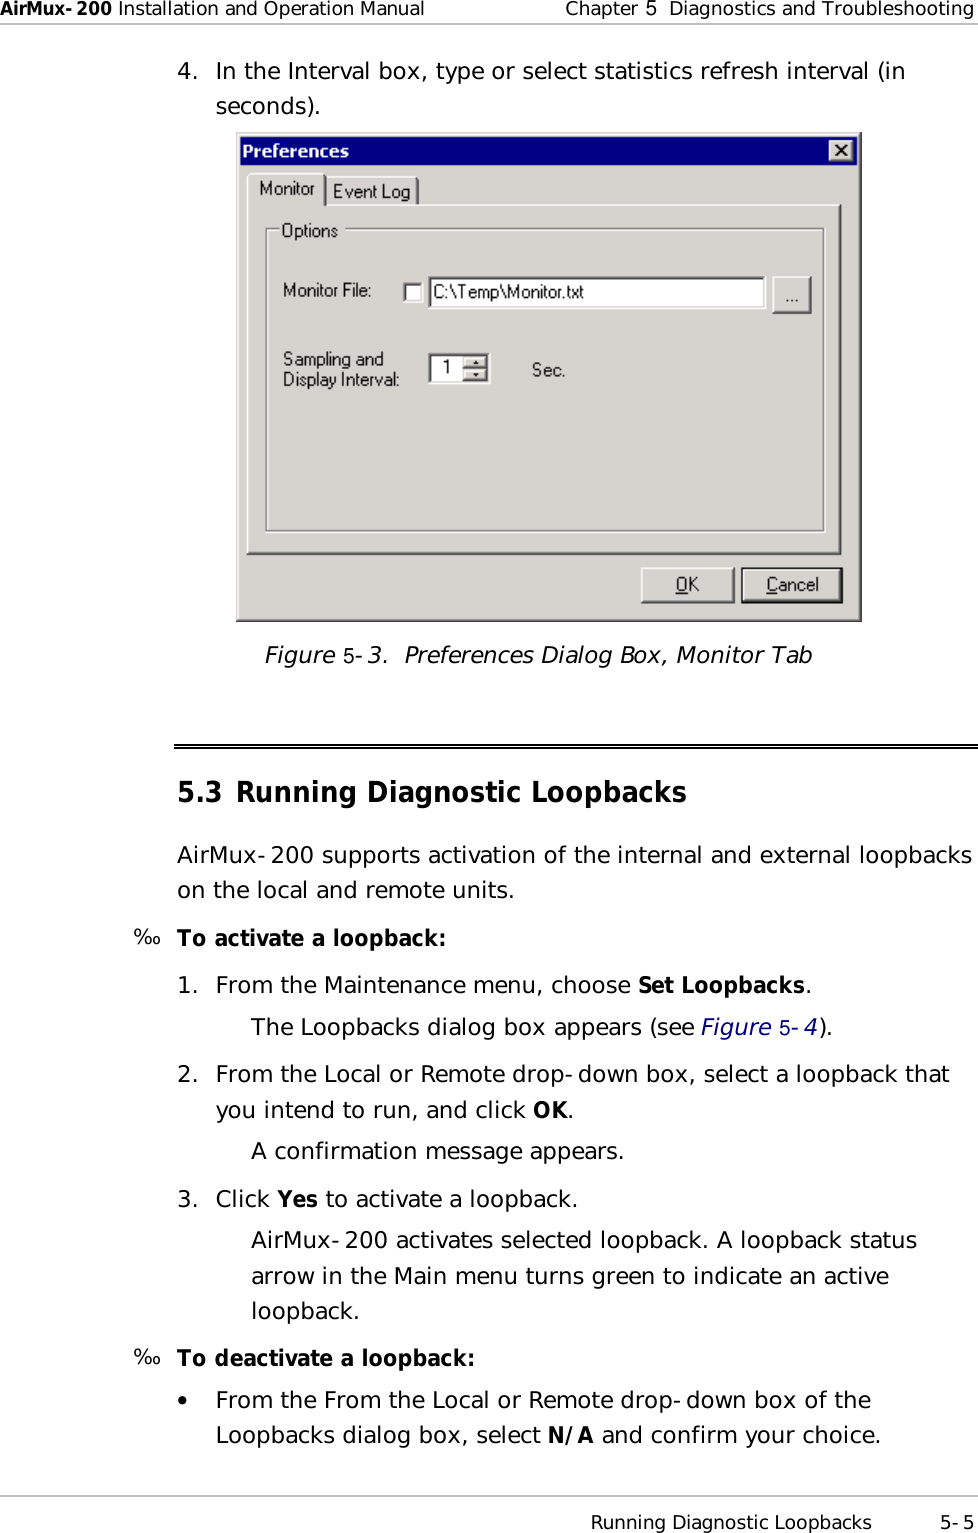 AirMux-200 Installation and Operation Manual Chapter   5  Diagnostics and Troubleshooting  Running Diagnostic Loopbacks 5-5 4. In the Interval box, type or select statistics refresh interval (in seconds).  Figure   5-3.  Preferences Dialog Box, Monitor Tab 5.3 Running Diagnostic Loopbacks AirMux-200 supports activation of the internal and external loopbacks on the local and remote units. ä  To activate a loopback: 1. From the Maintenance menu, choose Set Loopbacks. The Loopbacks dialog box appears (see Figure   5-4). 2. From the Local or Remote drop-down box, select a loopback that you intend to run, and click OK. A confirmation message appears. 3. Click Yes to activate a loopback. AirMux-200 activates selected loopback. A loopback status arrow in the Main menu turns green to indicate an active loopback.  ä  To deactivate a loopback: •  From the From the Local or Remote drop-down box of the Loopbacks dialog box, select N/A and confirm your choice. 